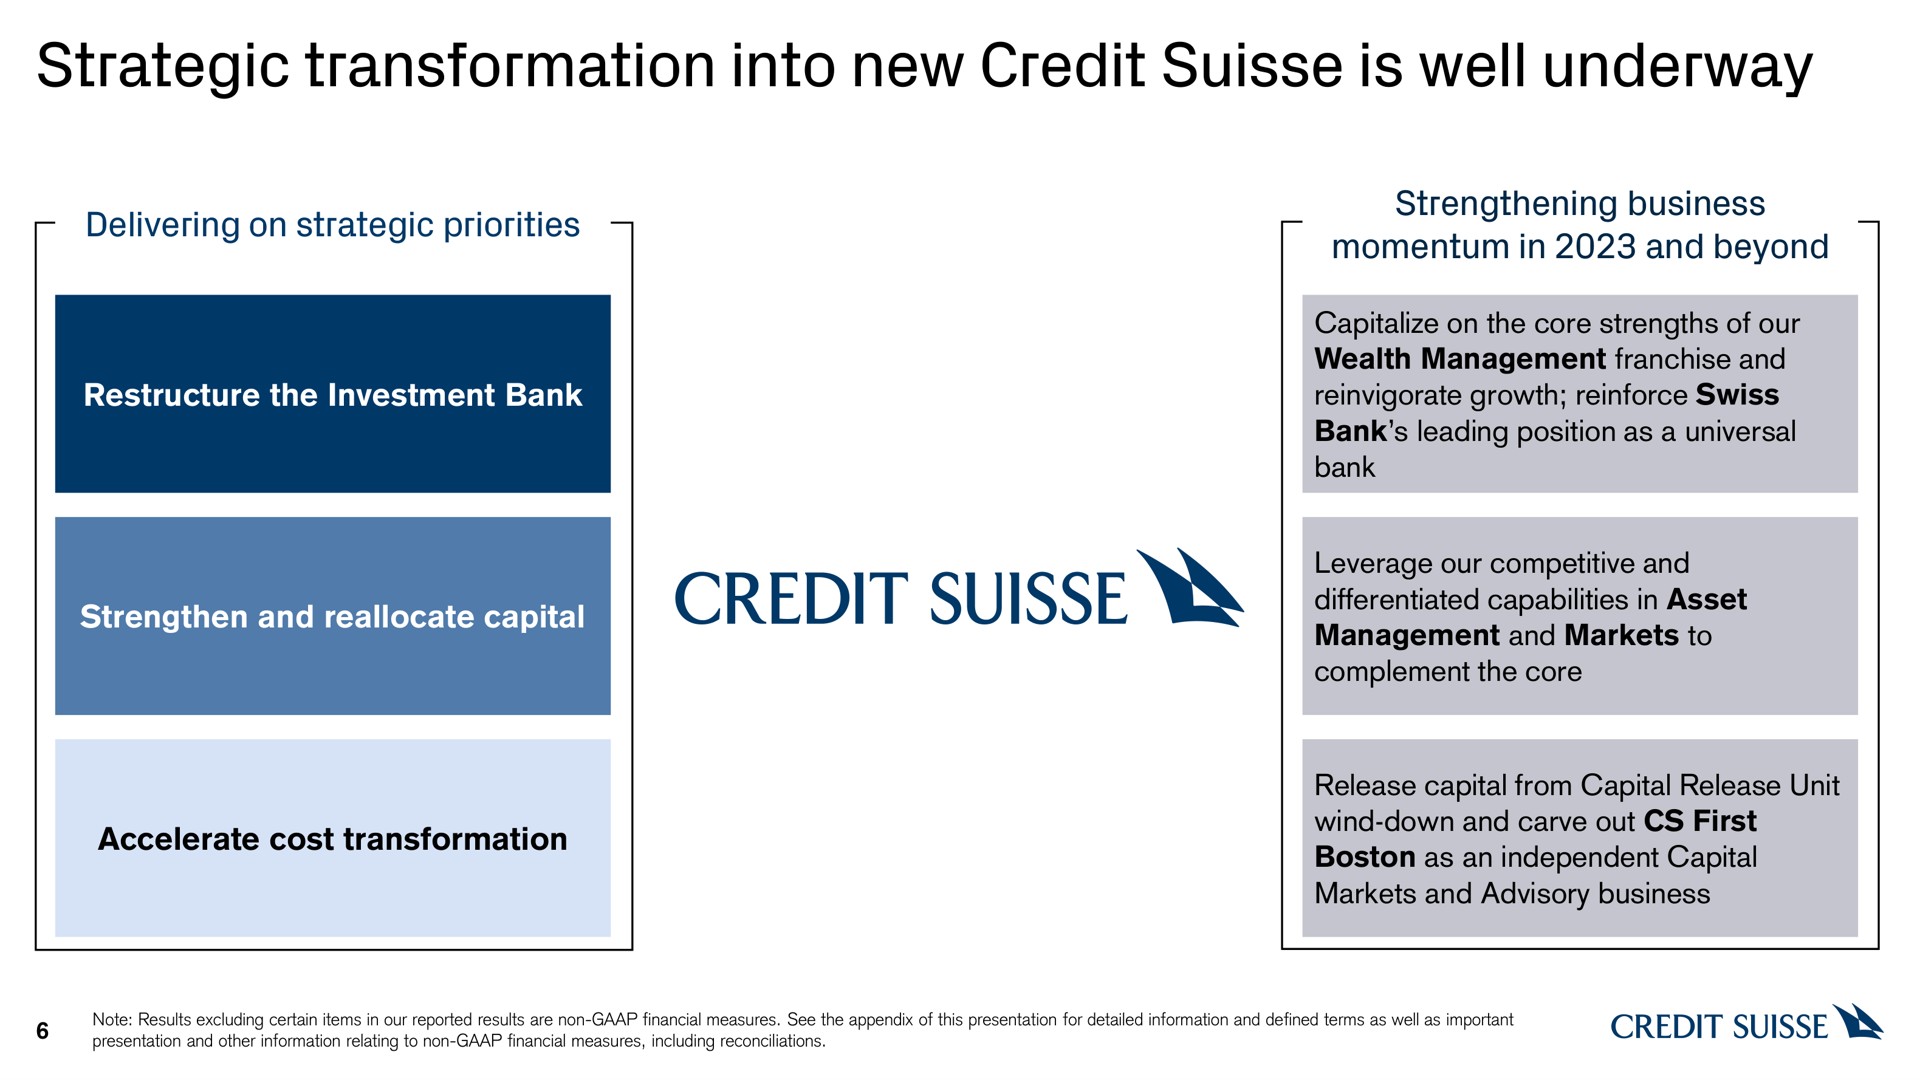 strategic transformation into new credit is well underway | Credit Suisse